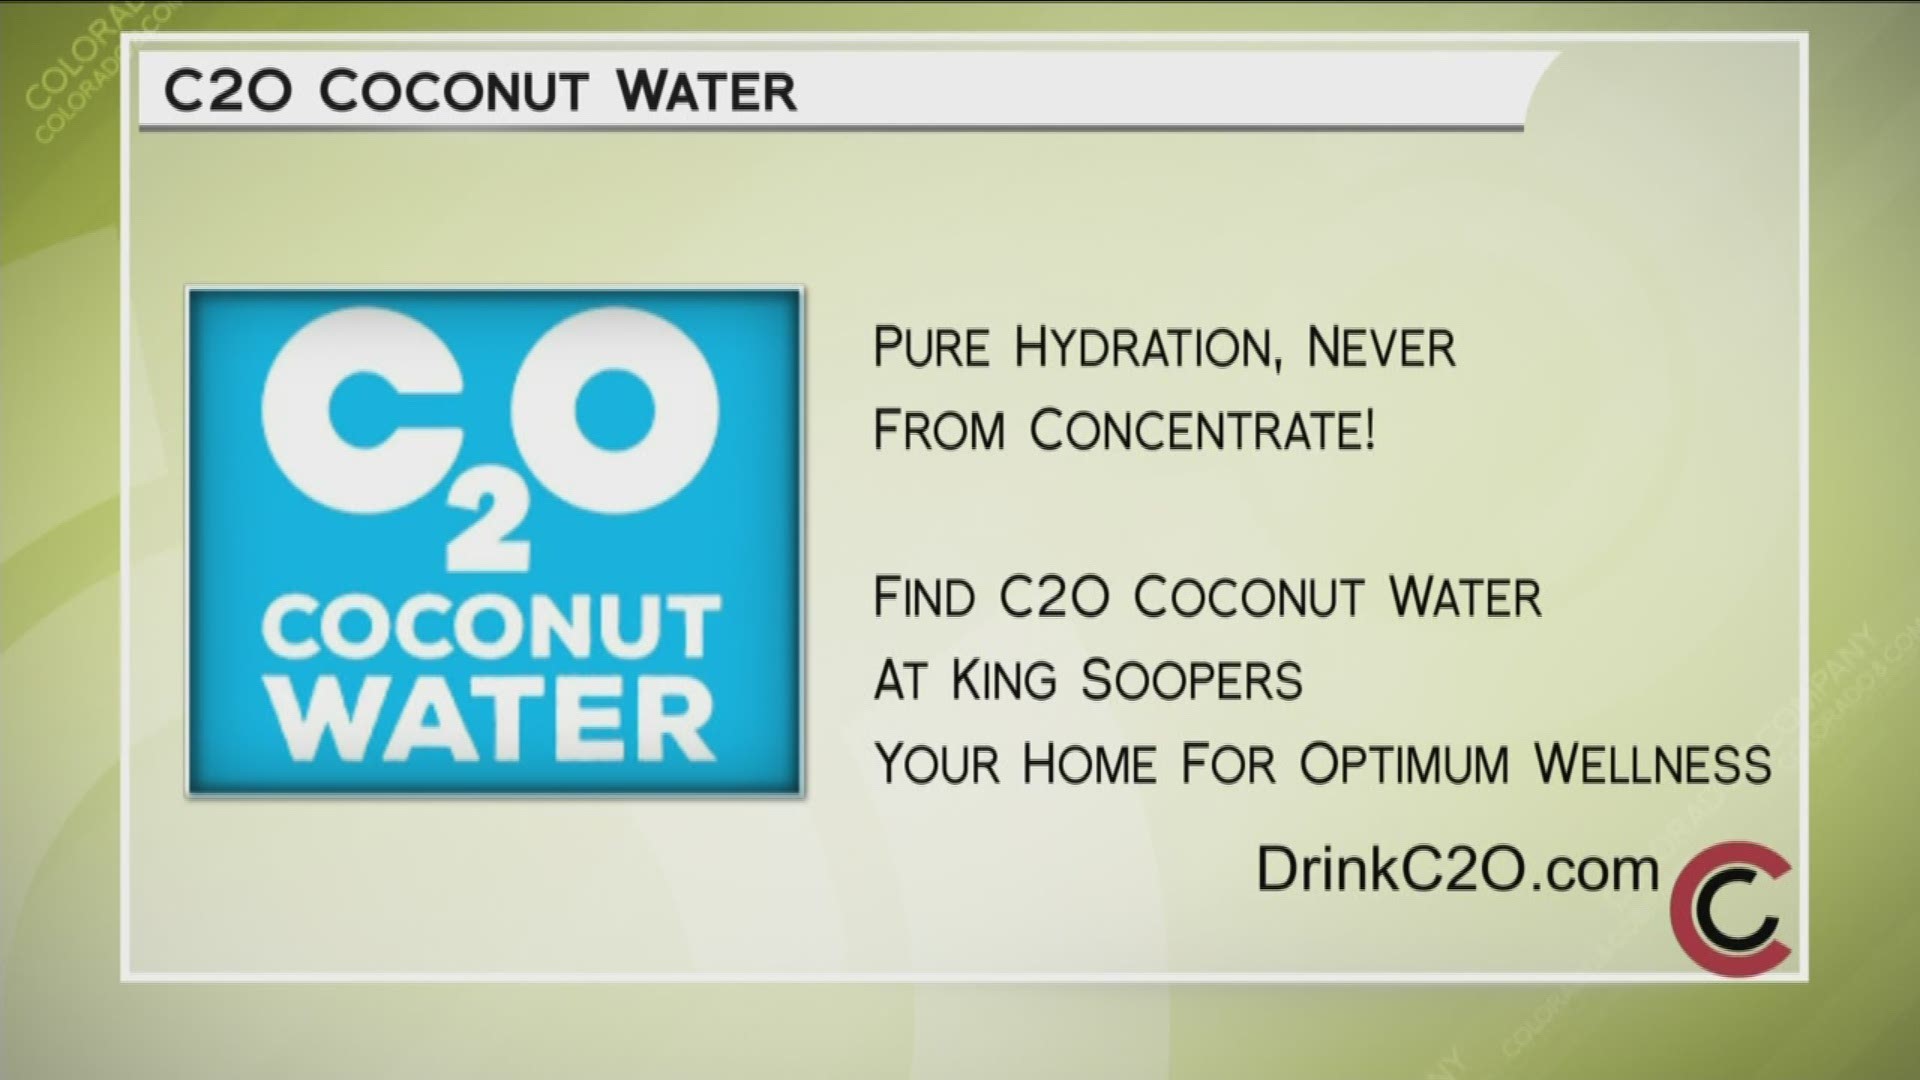 Find C2O Pure Coconut Water at your neighborhood King Soopers, your home for Optimum Wellness. Find recipes at www.DrinkC2O.com.  THIS INTERVIEW HAS COMMERCIAL CONTENT. PRODUCTS AND SERVICES FEATURED APPEAR AS PAID ADVERTISING.